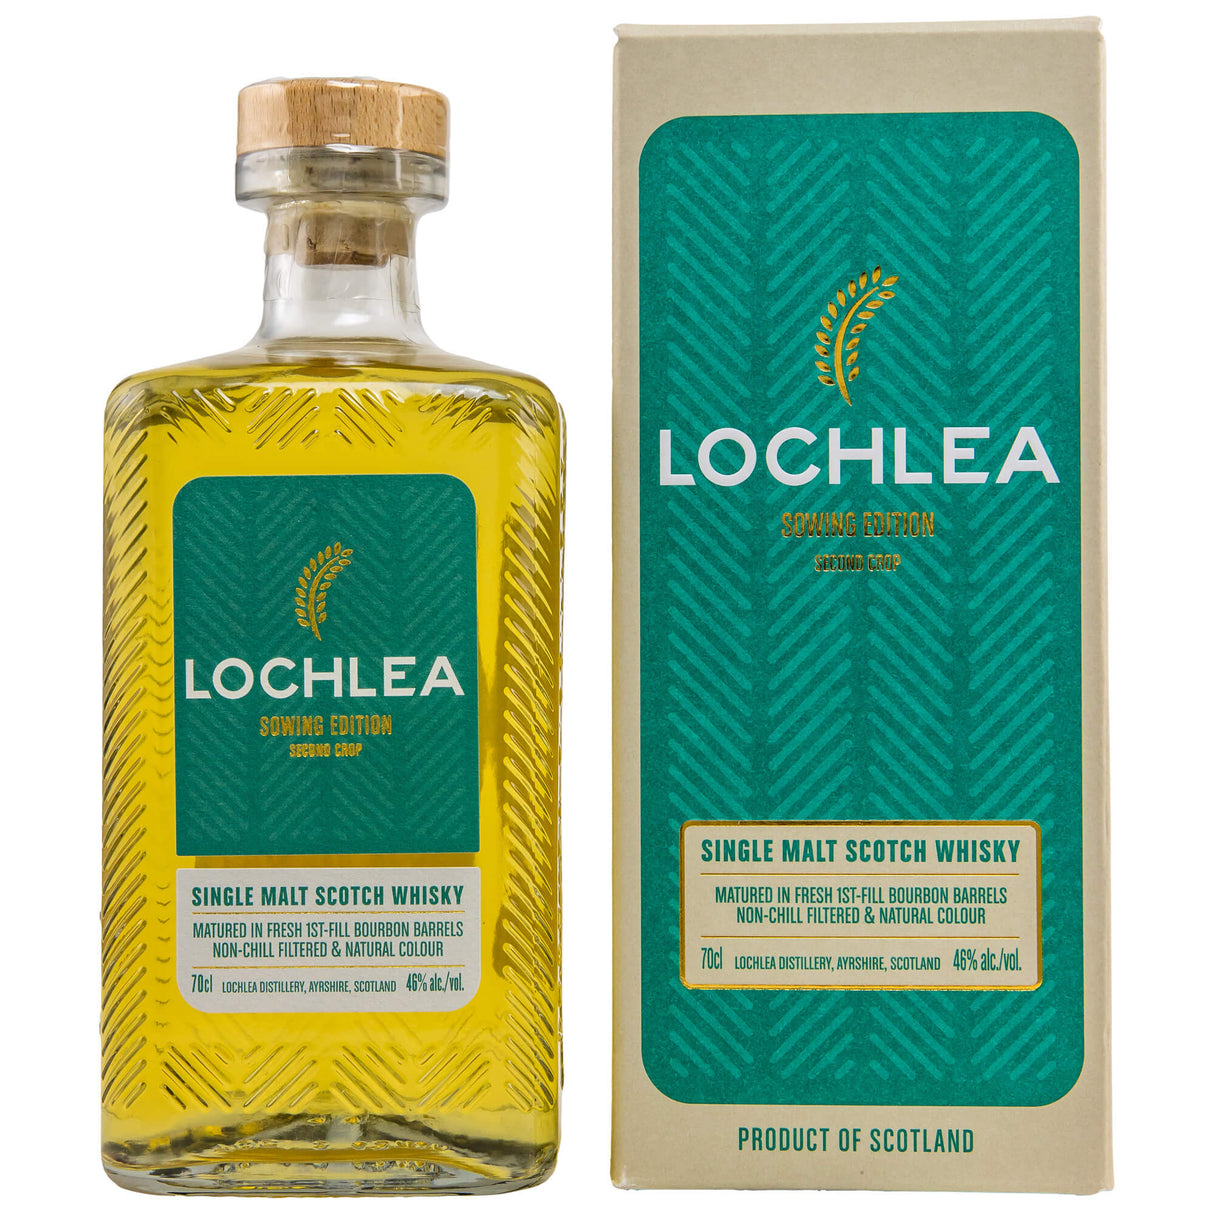 Lochlea Sowing Edition Second Crop Lowland Single Malt Whisky